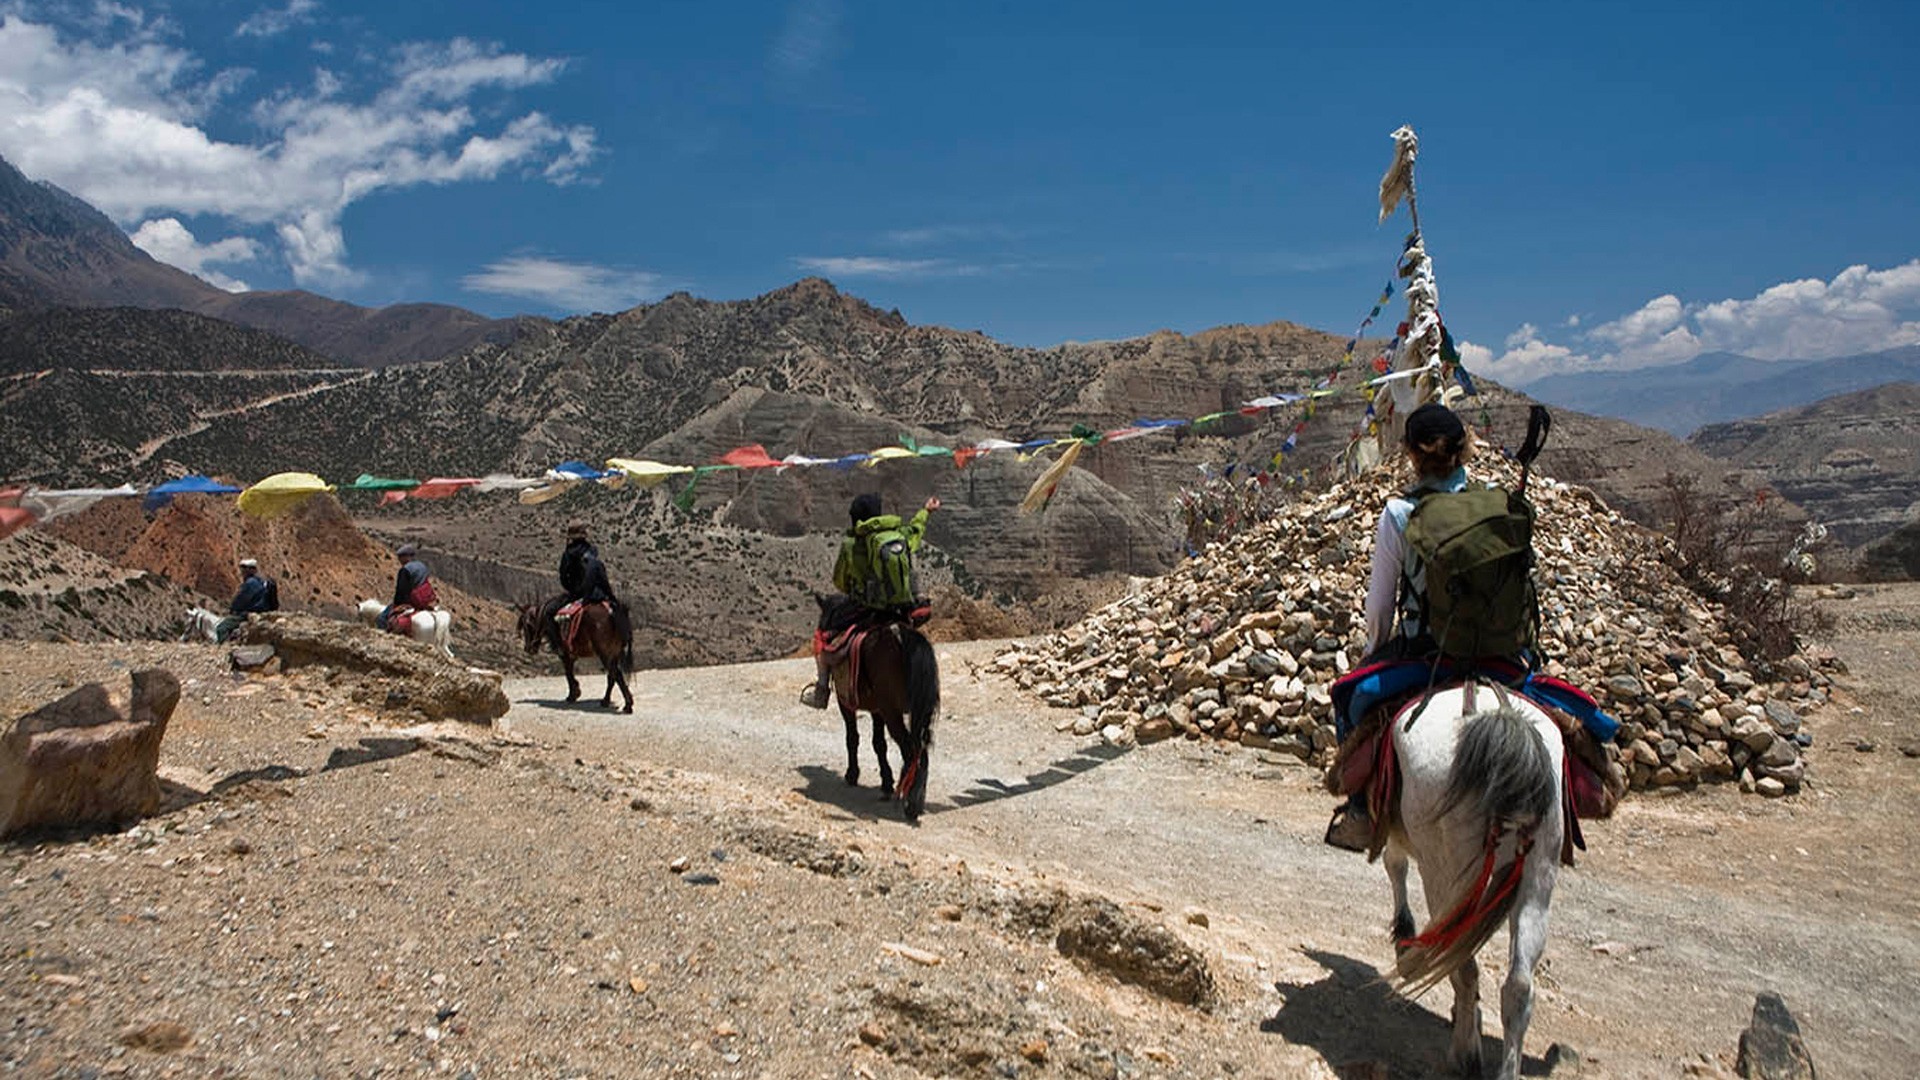 Major Attractions of Mustang Nepal